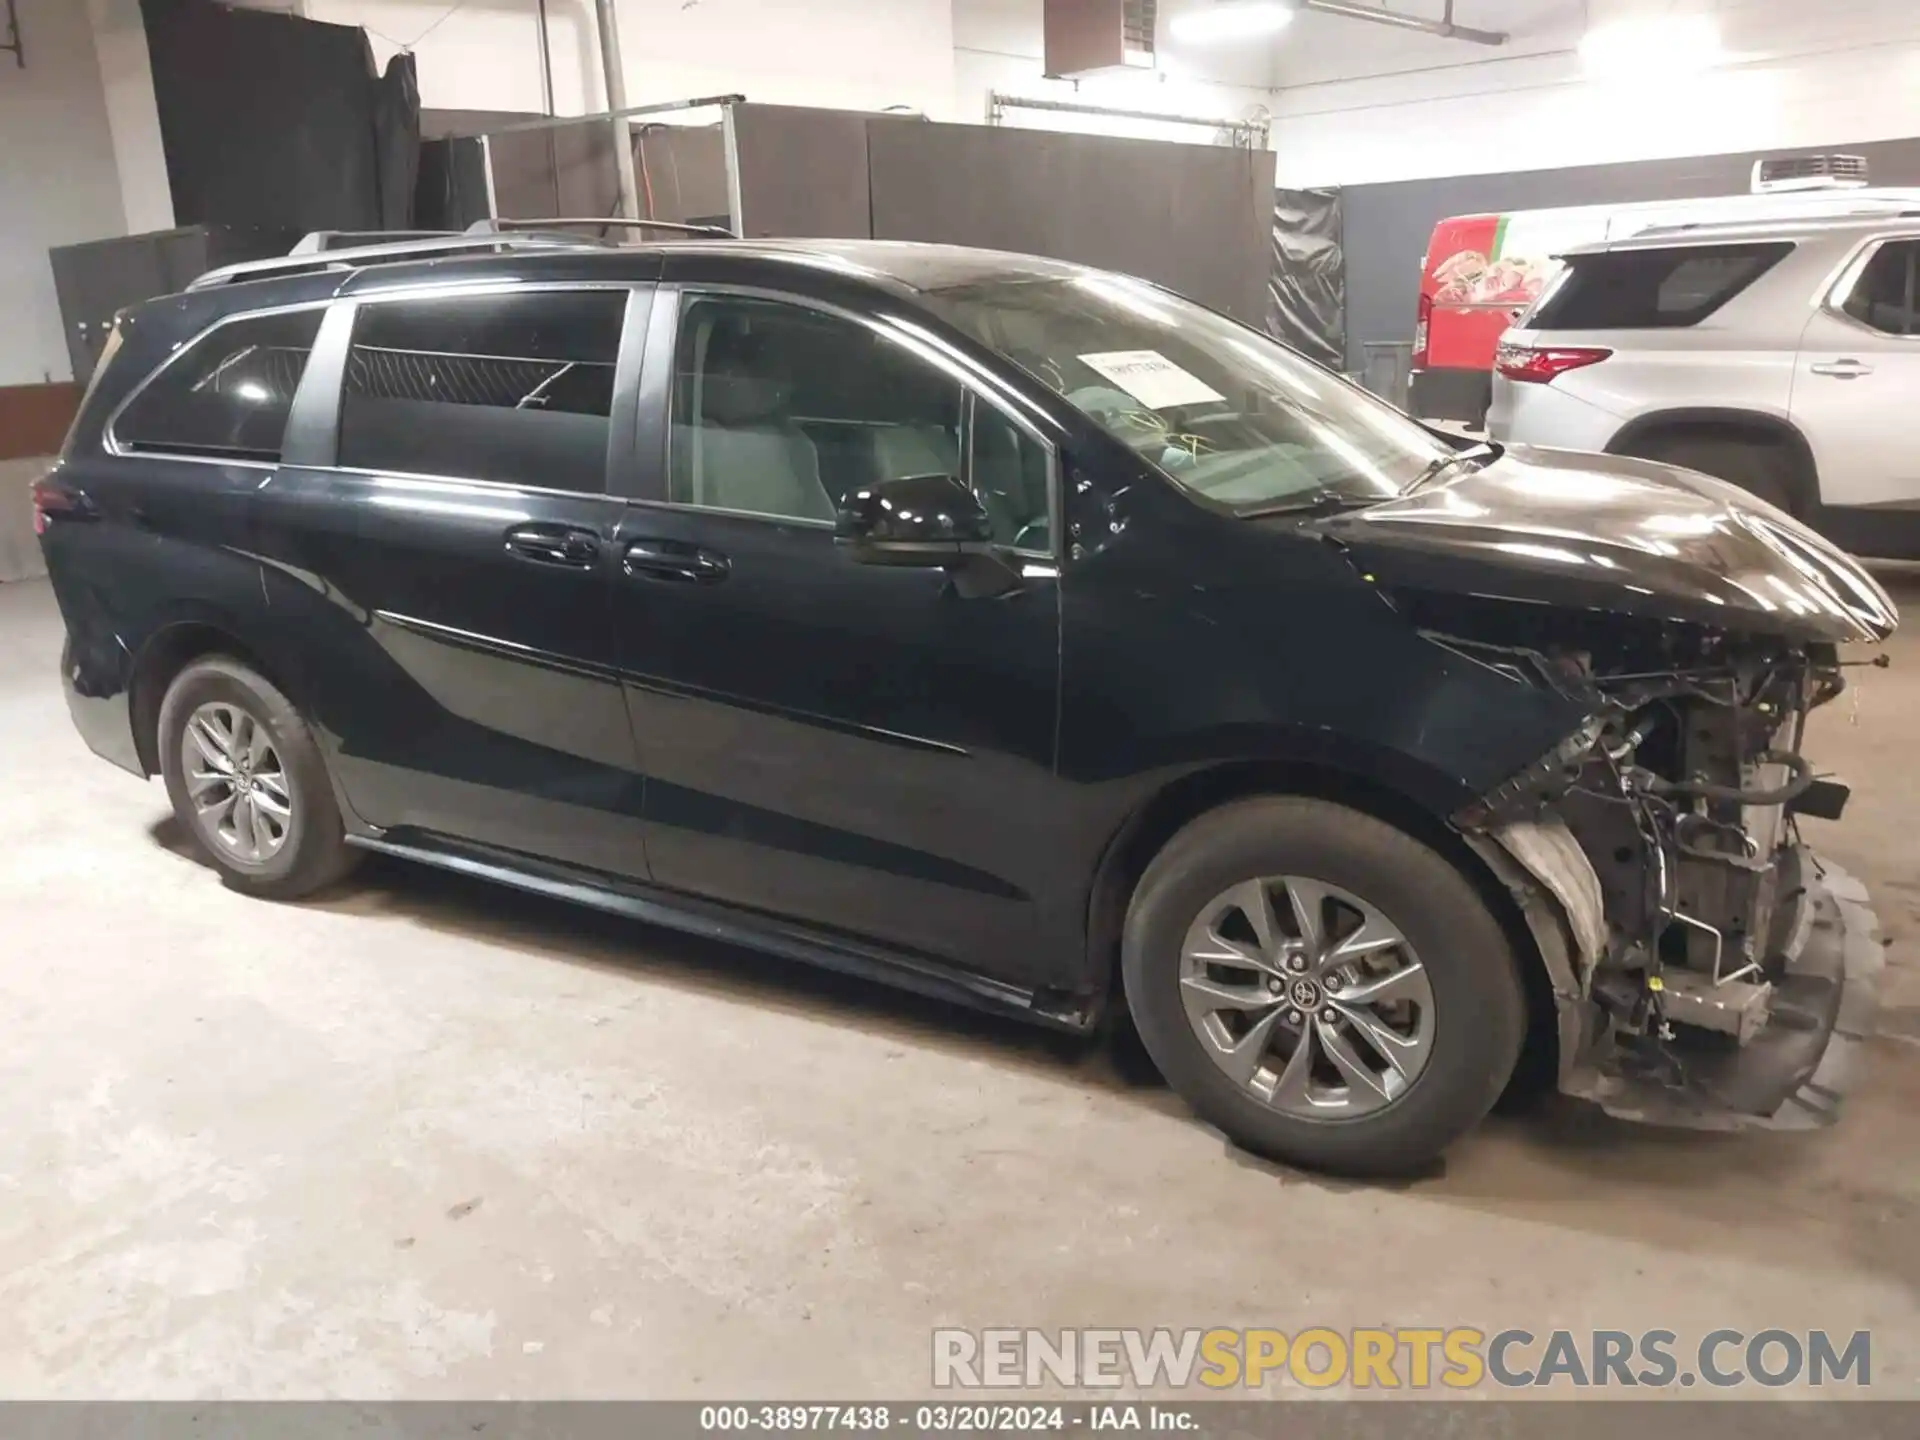 13 Photograph of a damaged car 5TDKRKEC9NS078004 TOYOTA SIENNA 2022